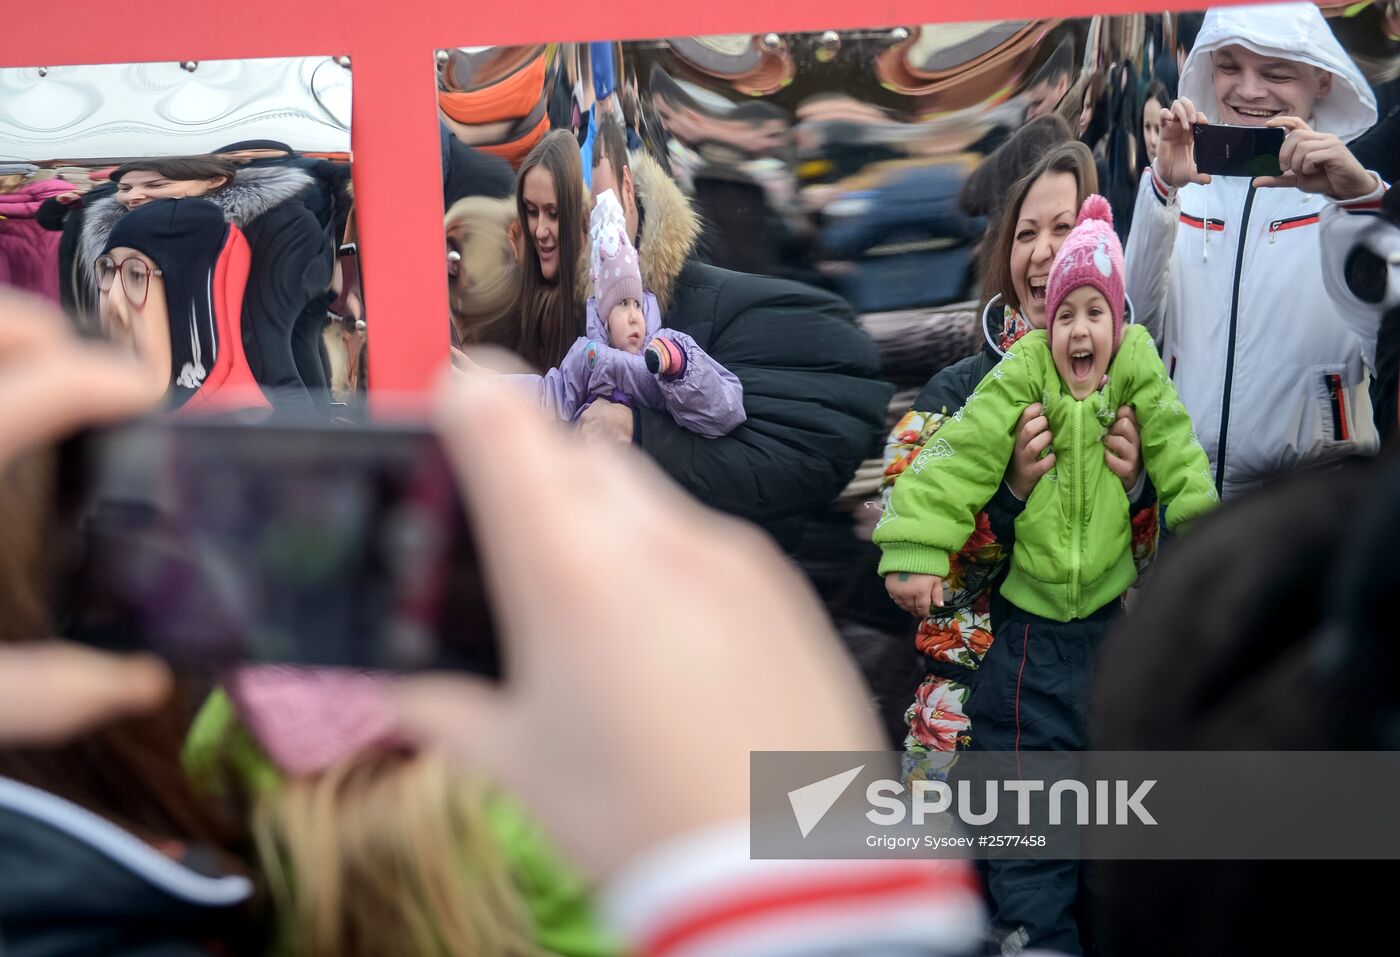 Shrovetide celebrations in Moscow